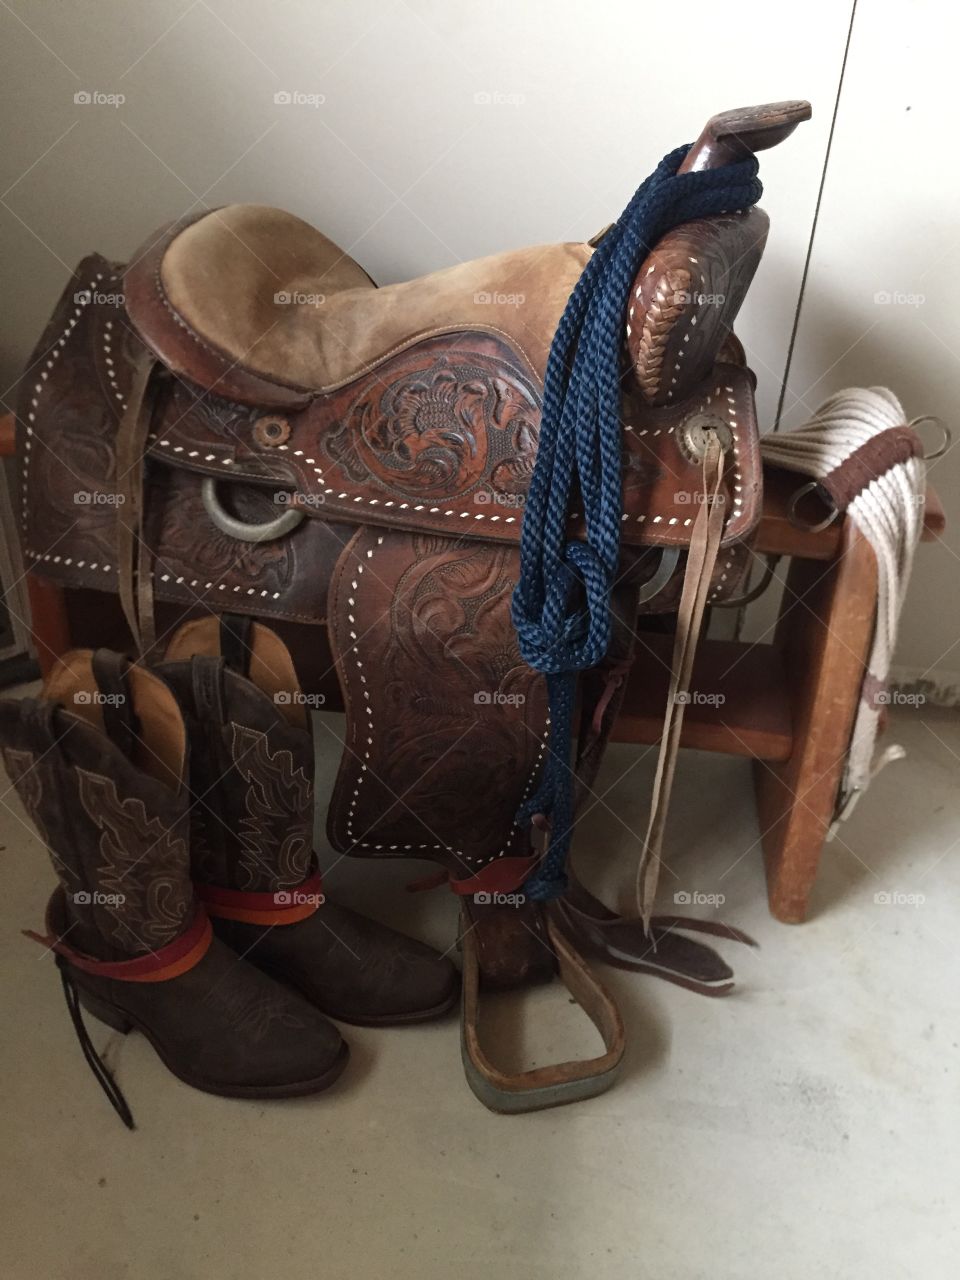 Cow girls gear Saddle shiny and ready a rope Cinch affirm seat to settle down in for a day or riding